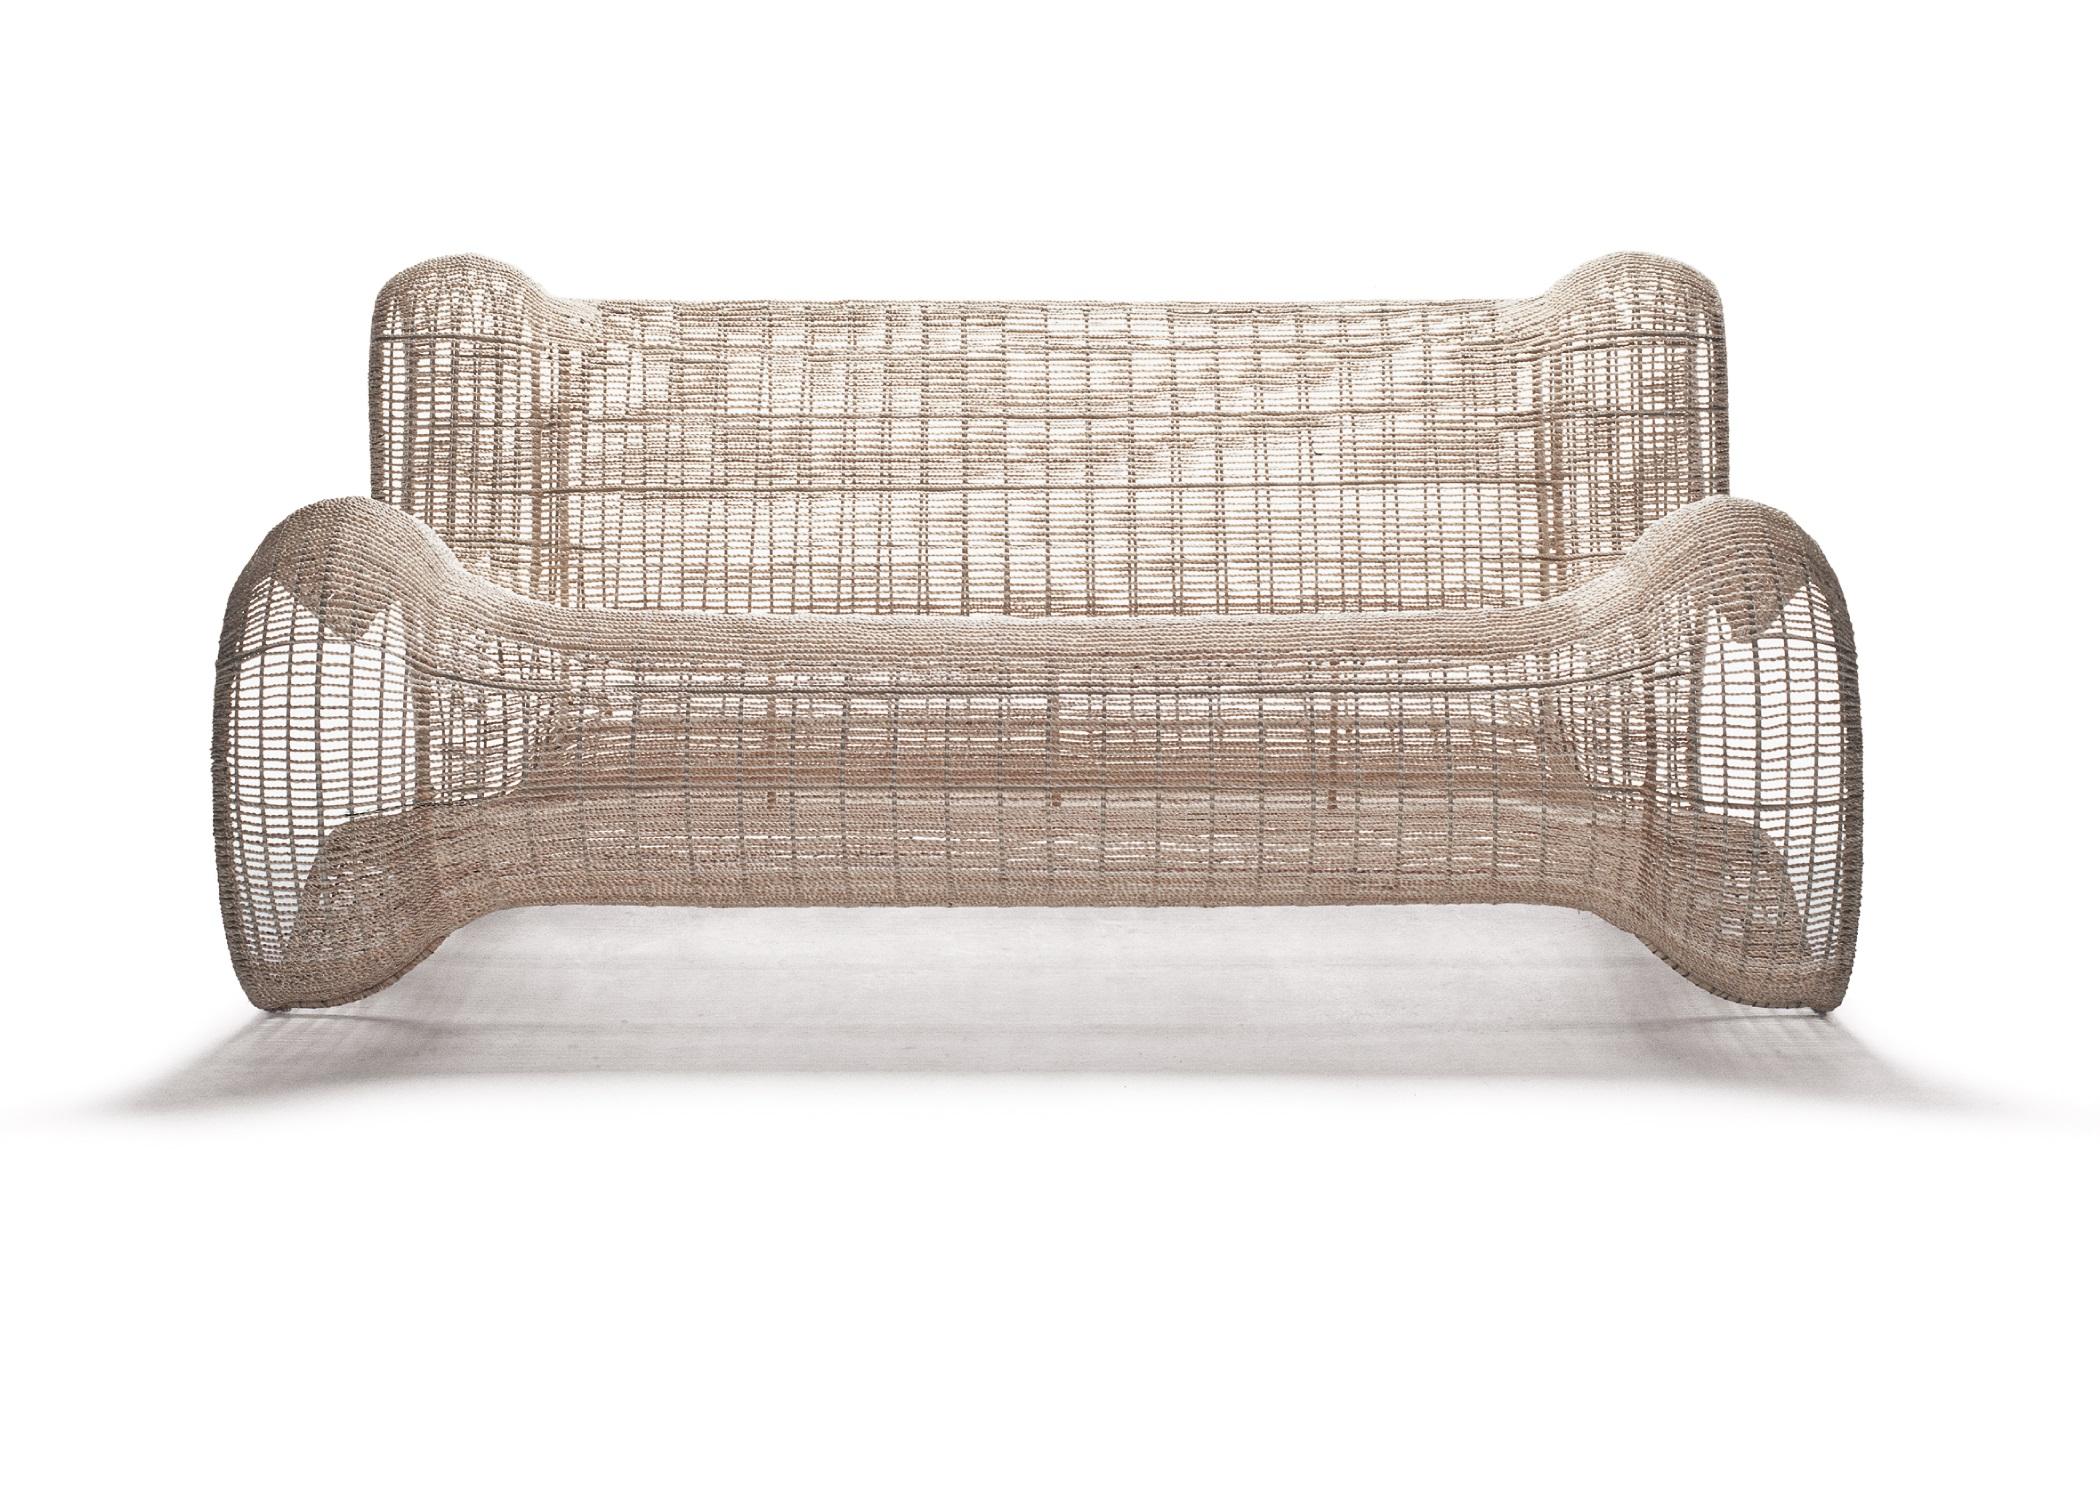 Indoor Pigalle loveseat by Kenneth Cobonpue.
Materials: Abaca, nylon, steel. 
Also available in other colors and for outdoors. Prices for upholstery and fabric upon request.
Dimensions: 100 cm x 158 cm x H 77.5 cm 

Experience the sculptural